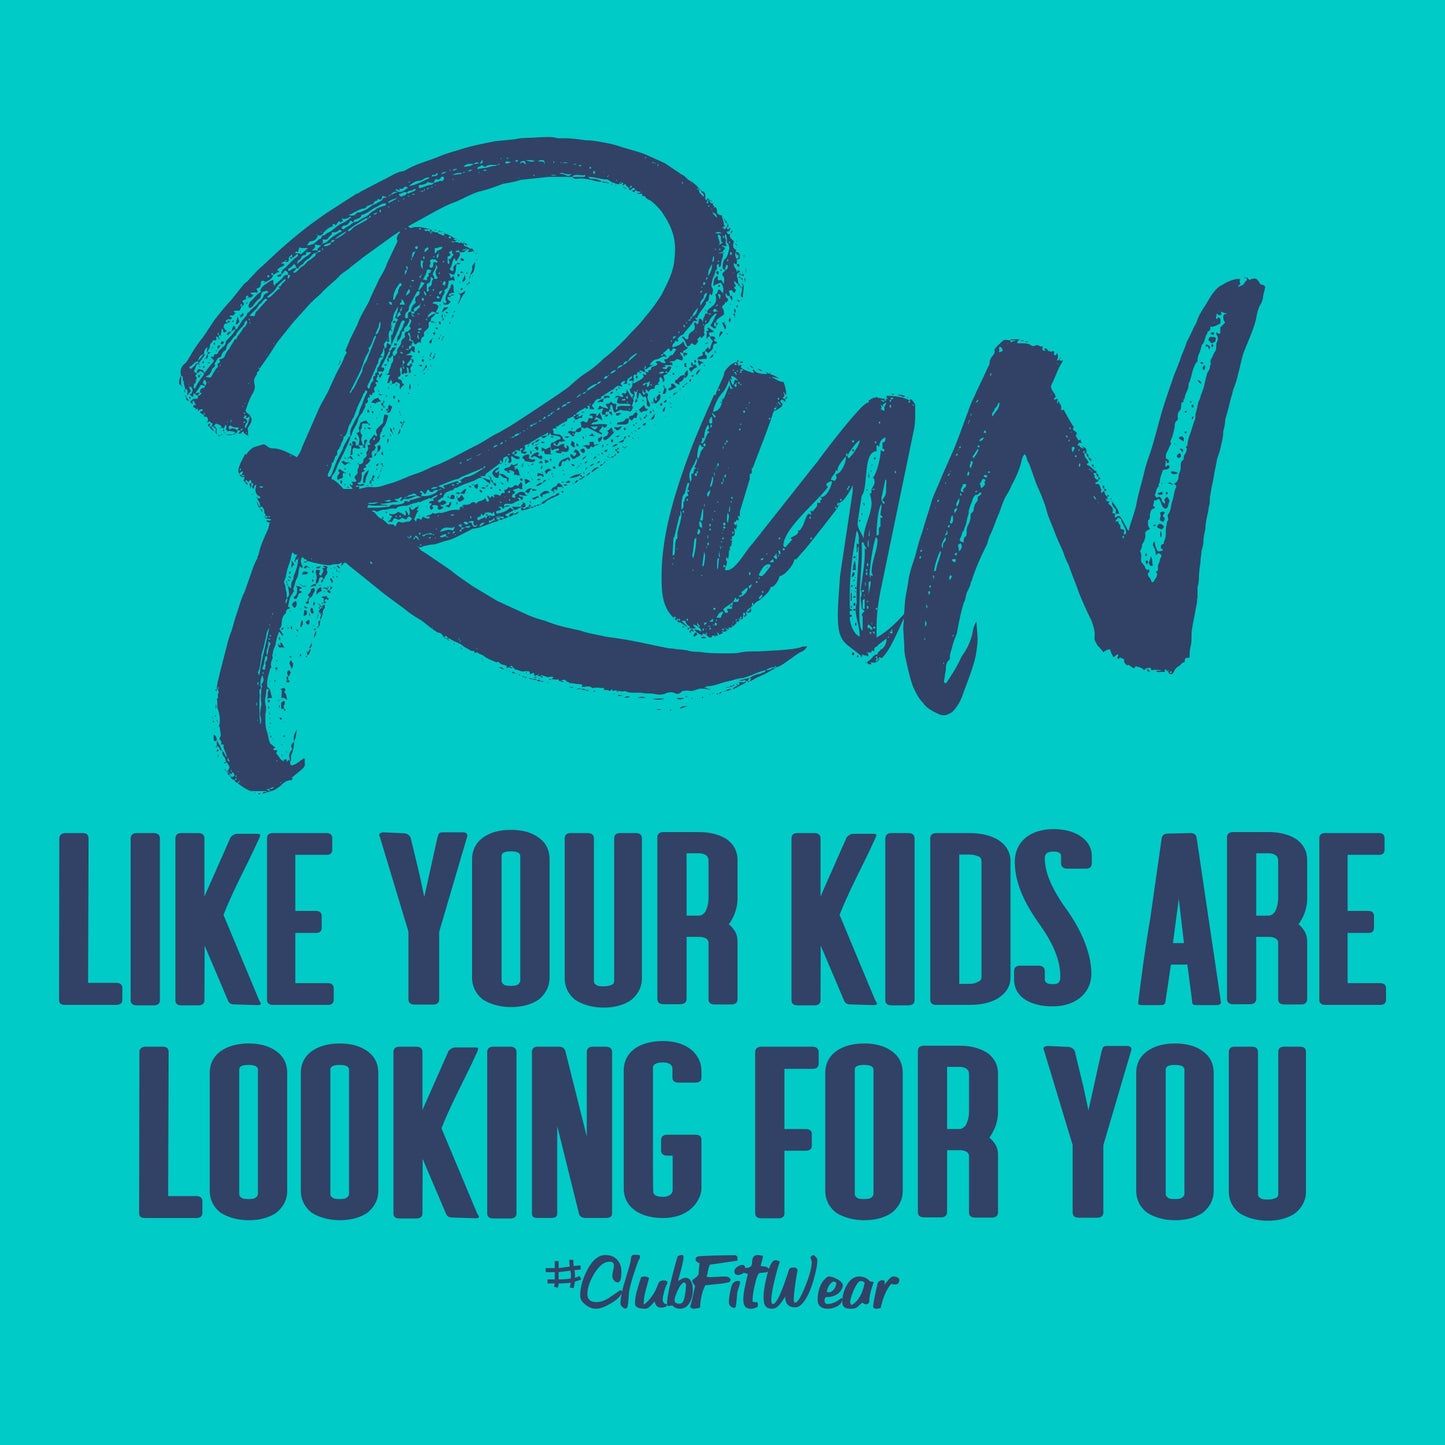 Run like your kids are looking for you